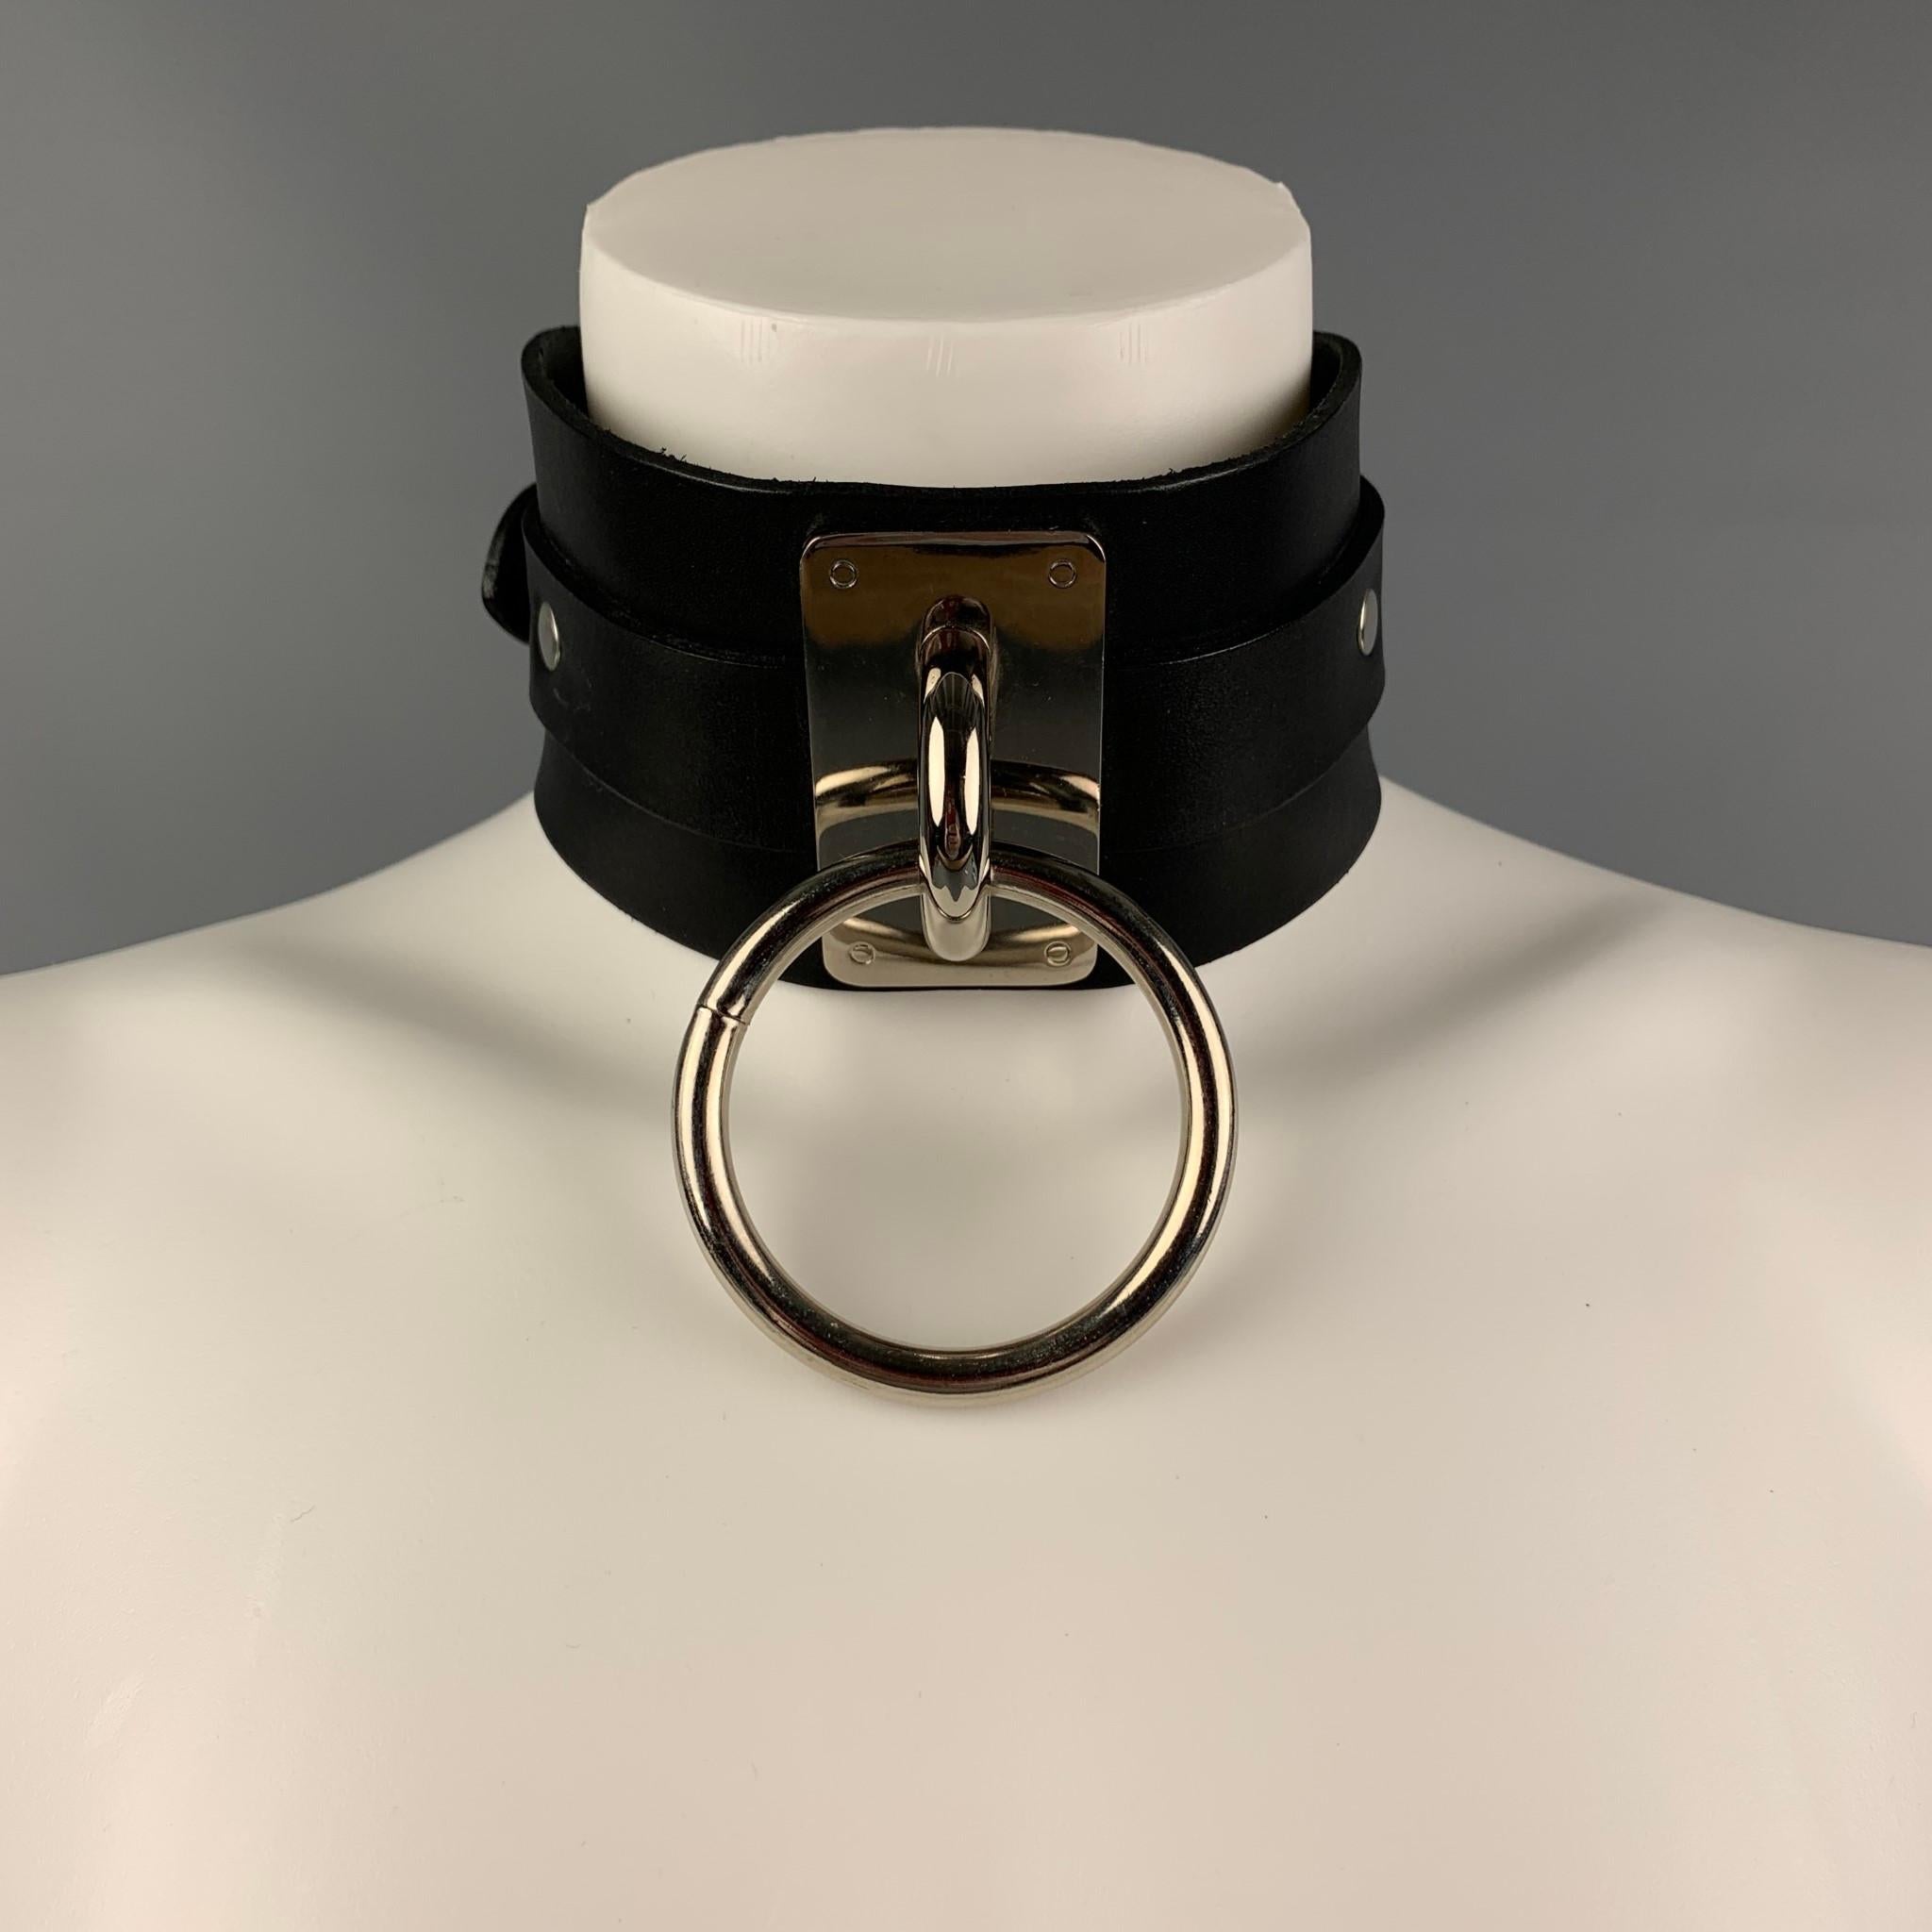 ZANA BAYNE necklace comes in a black leather featuring a choker style, silver tone ring, and a d-ring buckle closure. Made in USA. 


Very Good Pre-Owned Condition.
Marked: Size not marked:

Length: 20 in.
Height: 2.5 in. 
